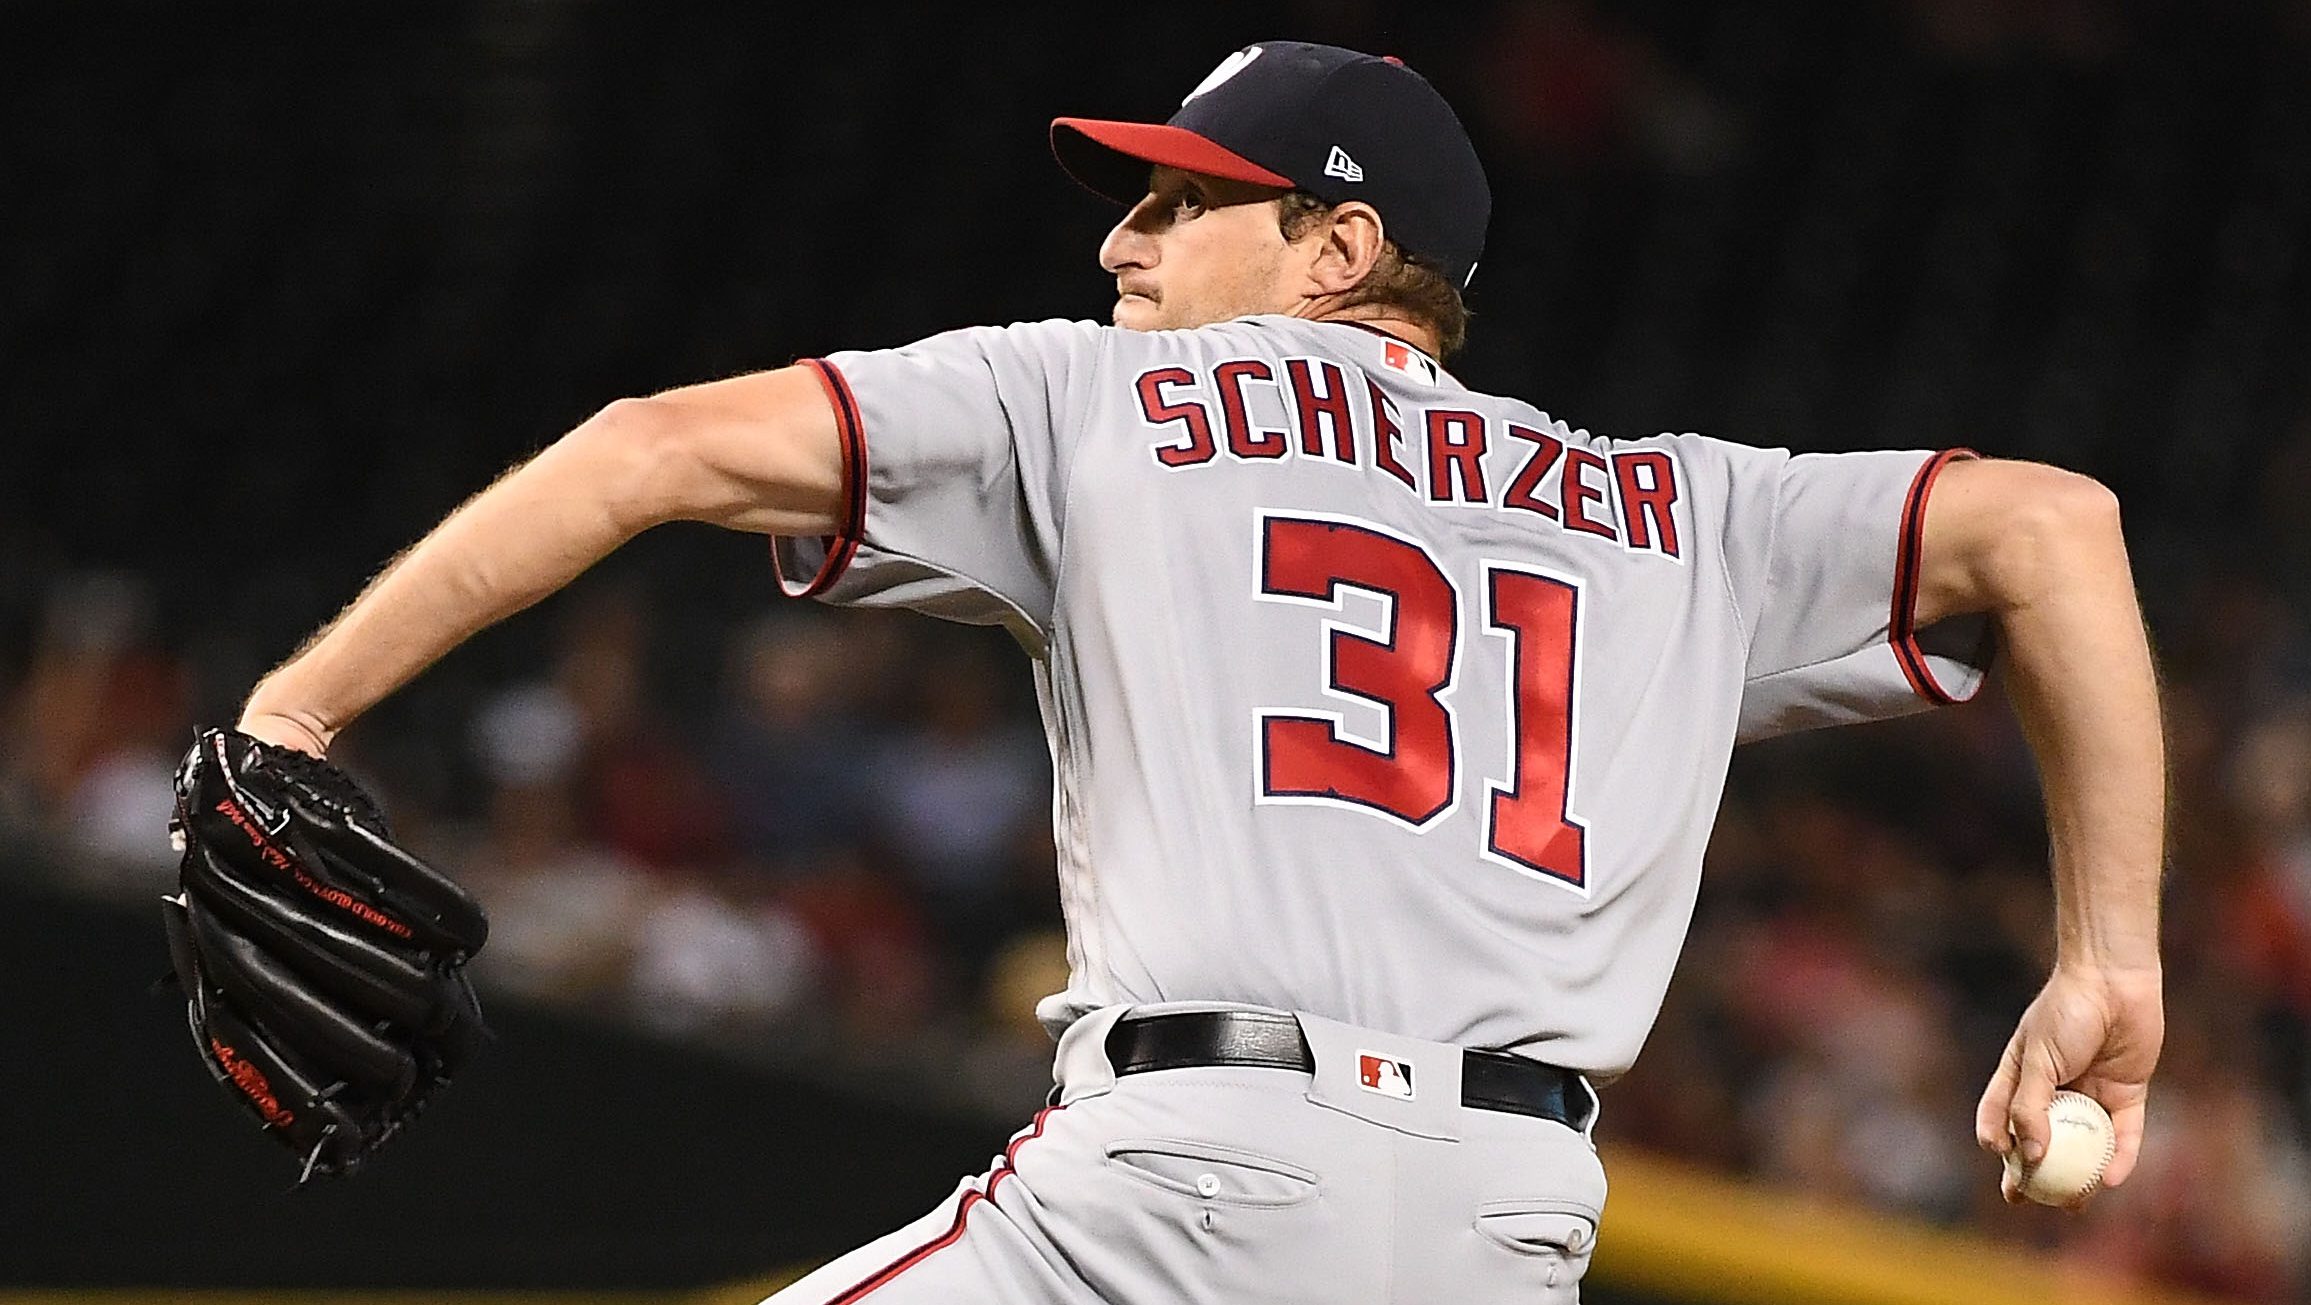 Strong Pitching Options and Hot Bats in Wednesday's MLB DFS Slate